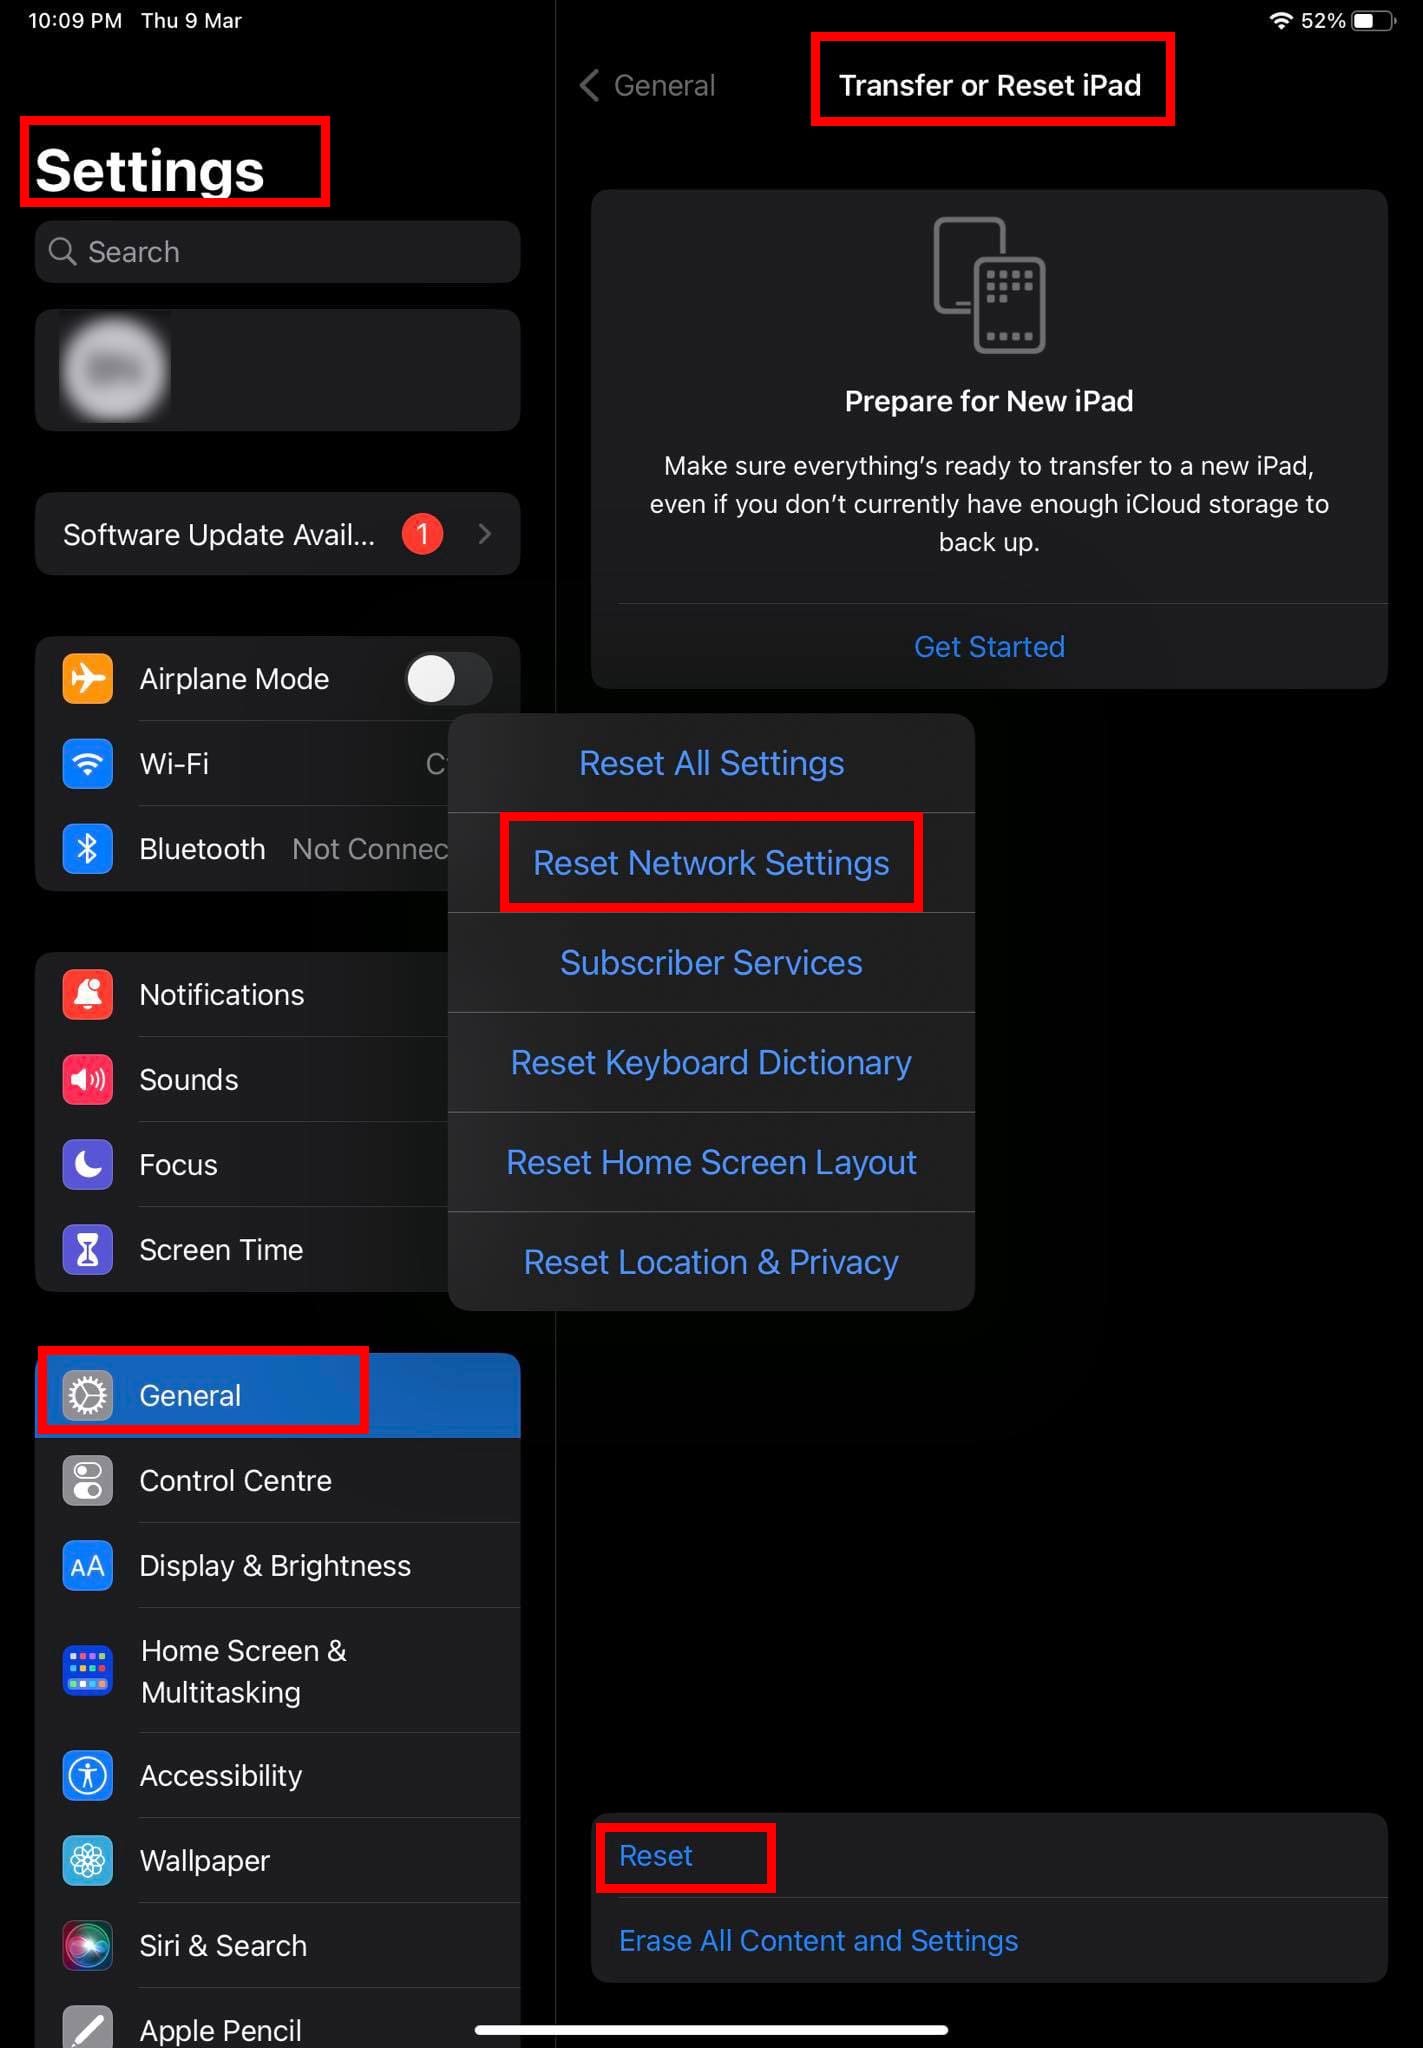 Learn how to reset network settings on iOS